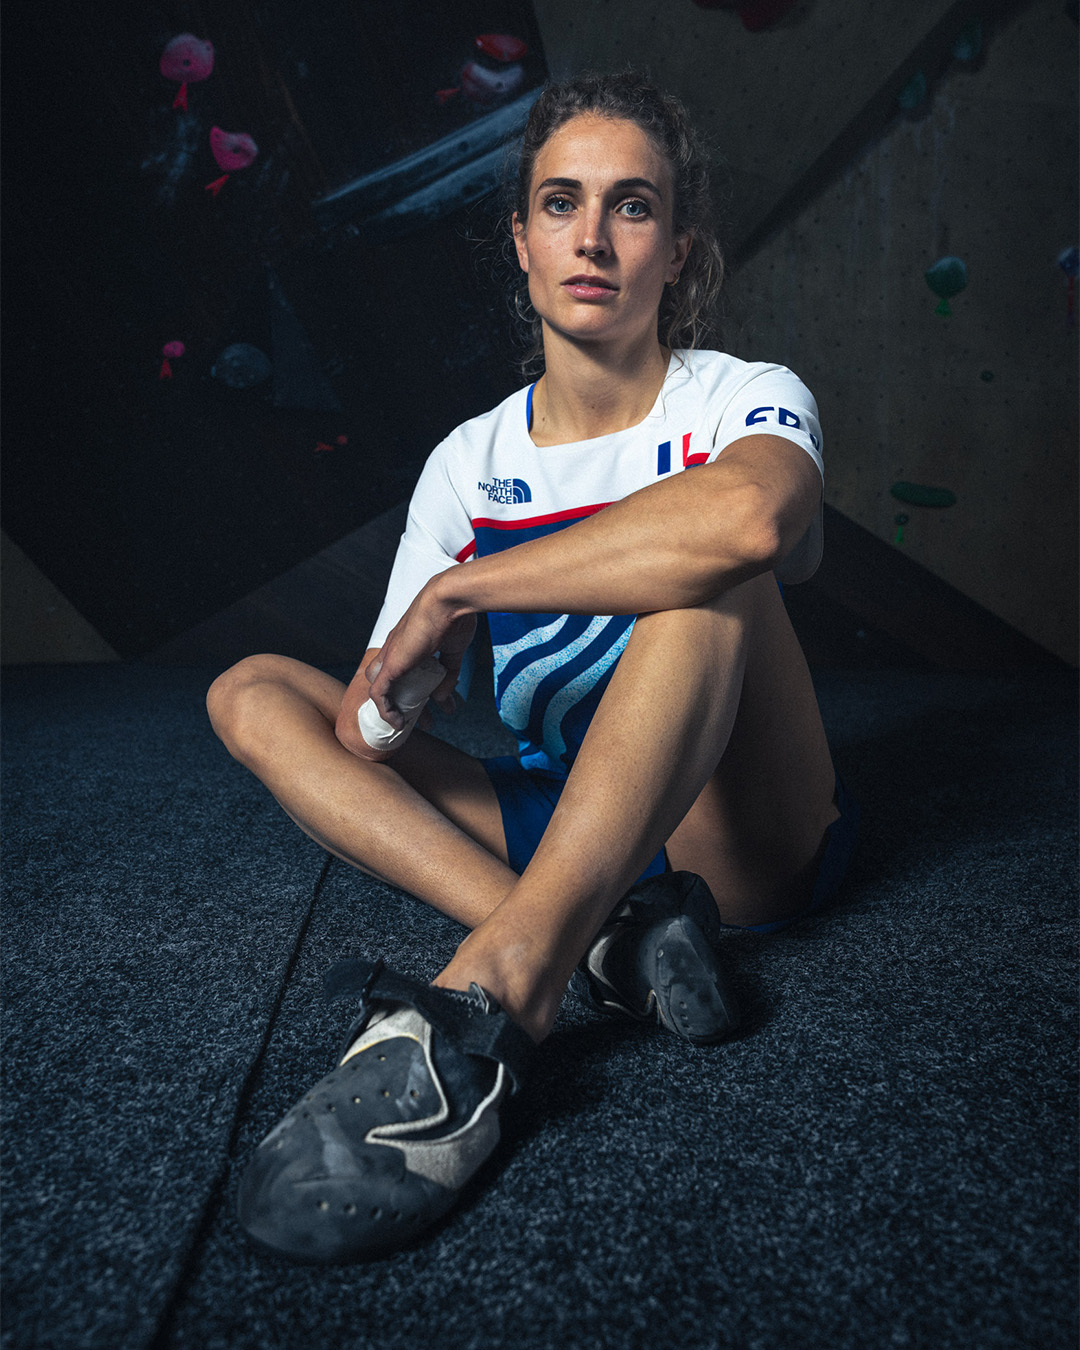 Woman in a climbing gym wearing a sports jersey and holding climbing shoes